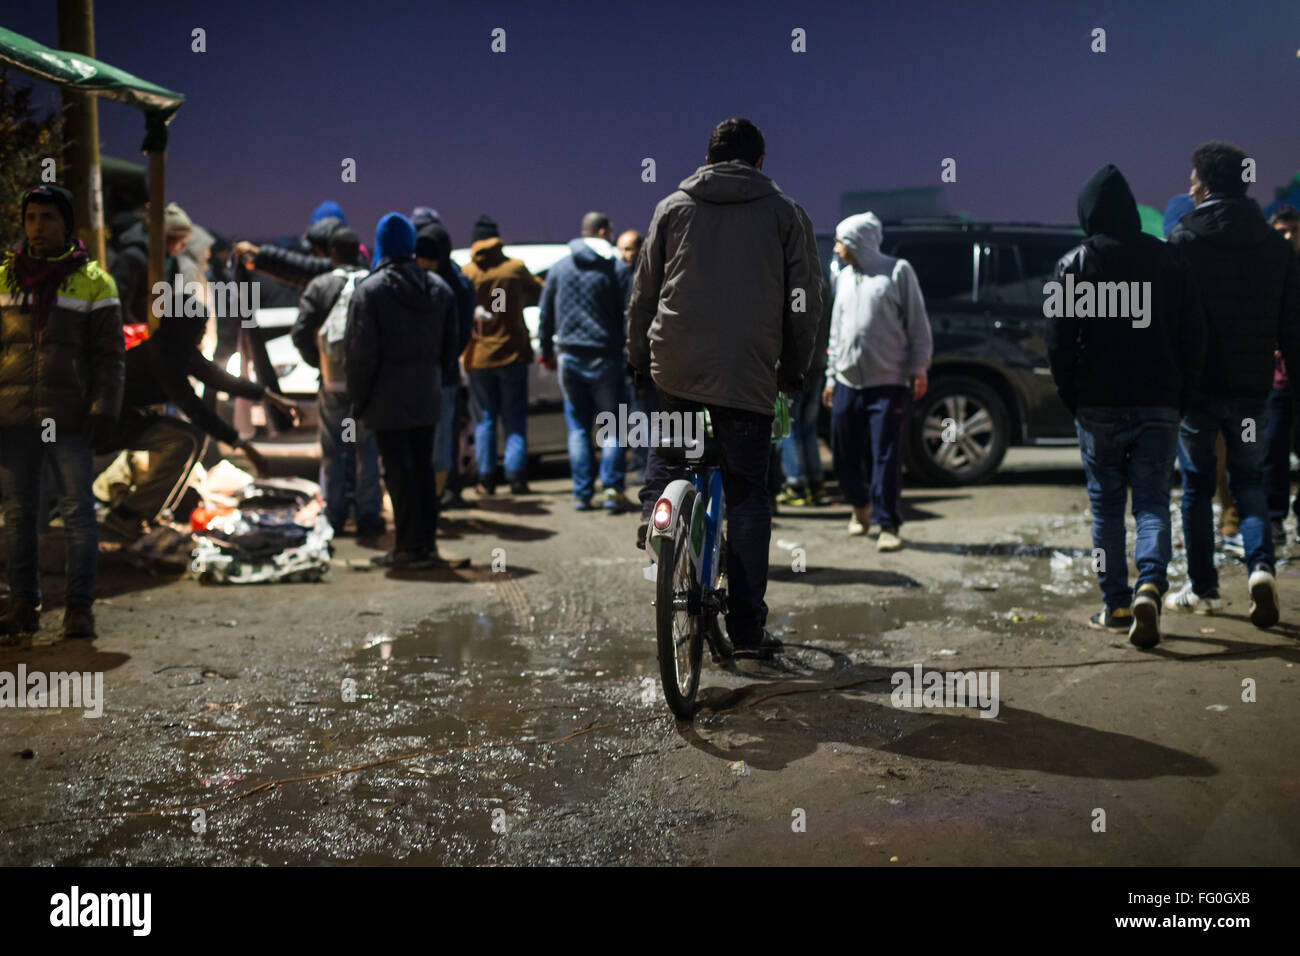 A refugee cycles through the mud at night in the Jungle Refugee Camp, Calais France Stock Photo